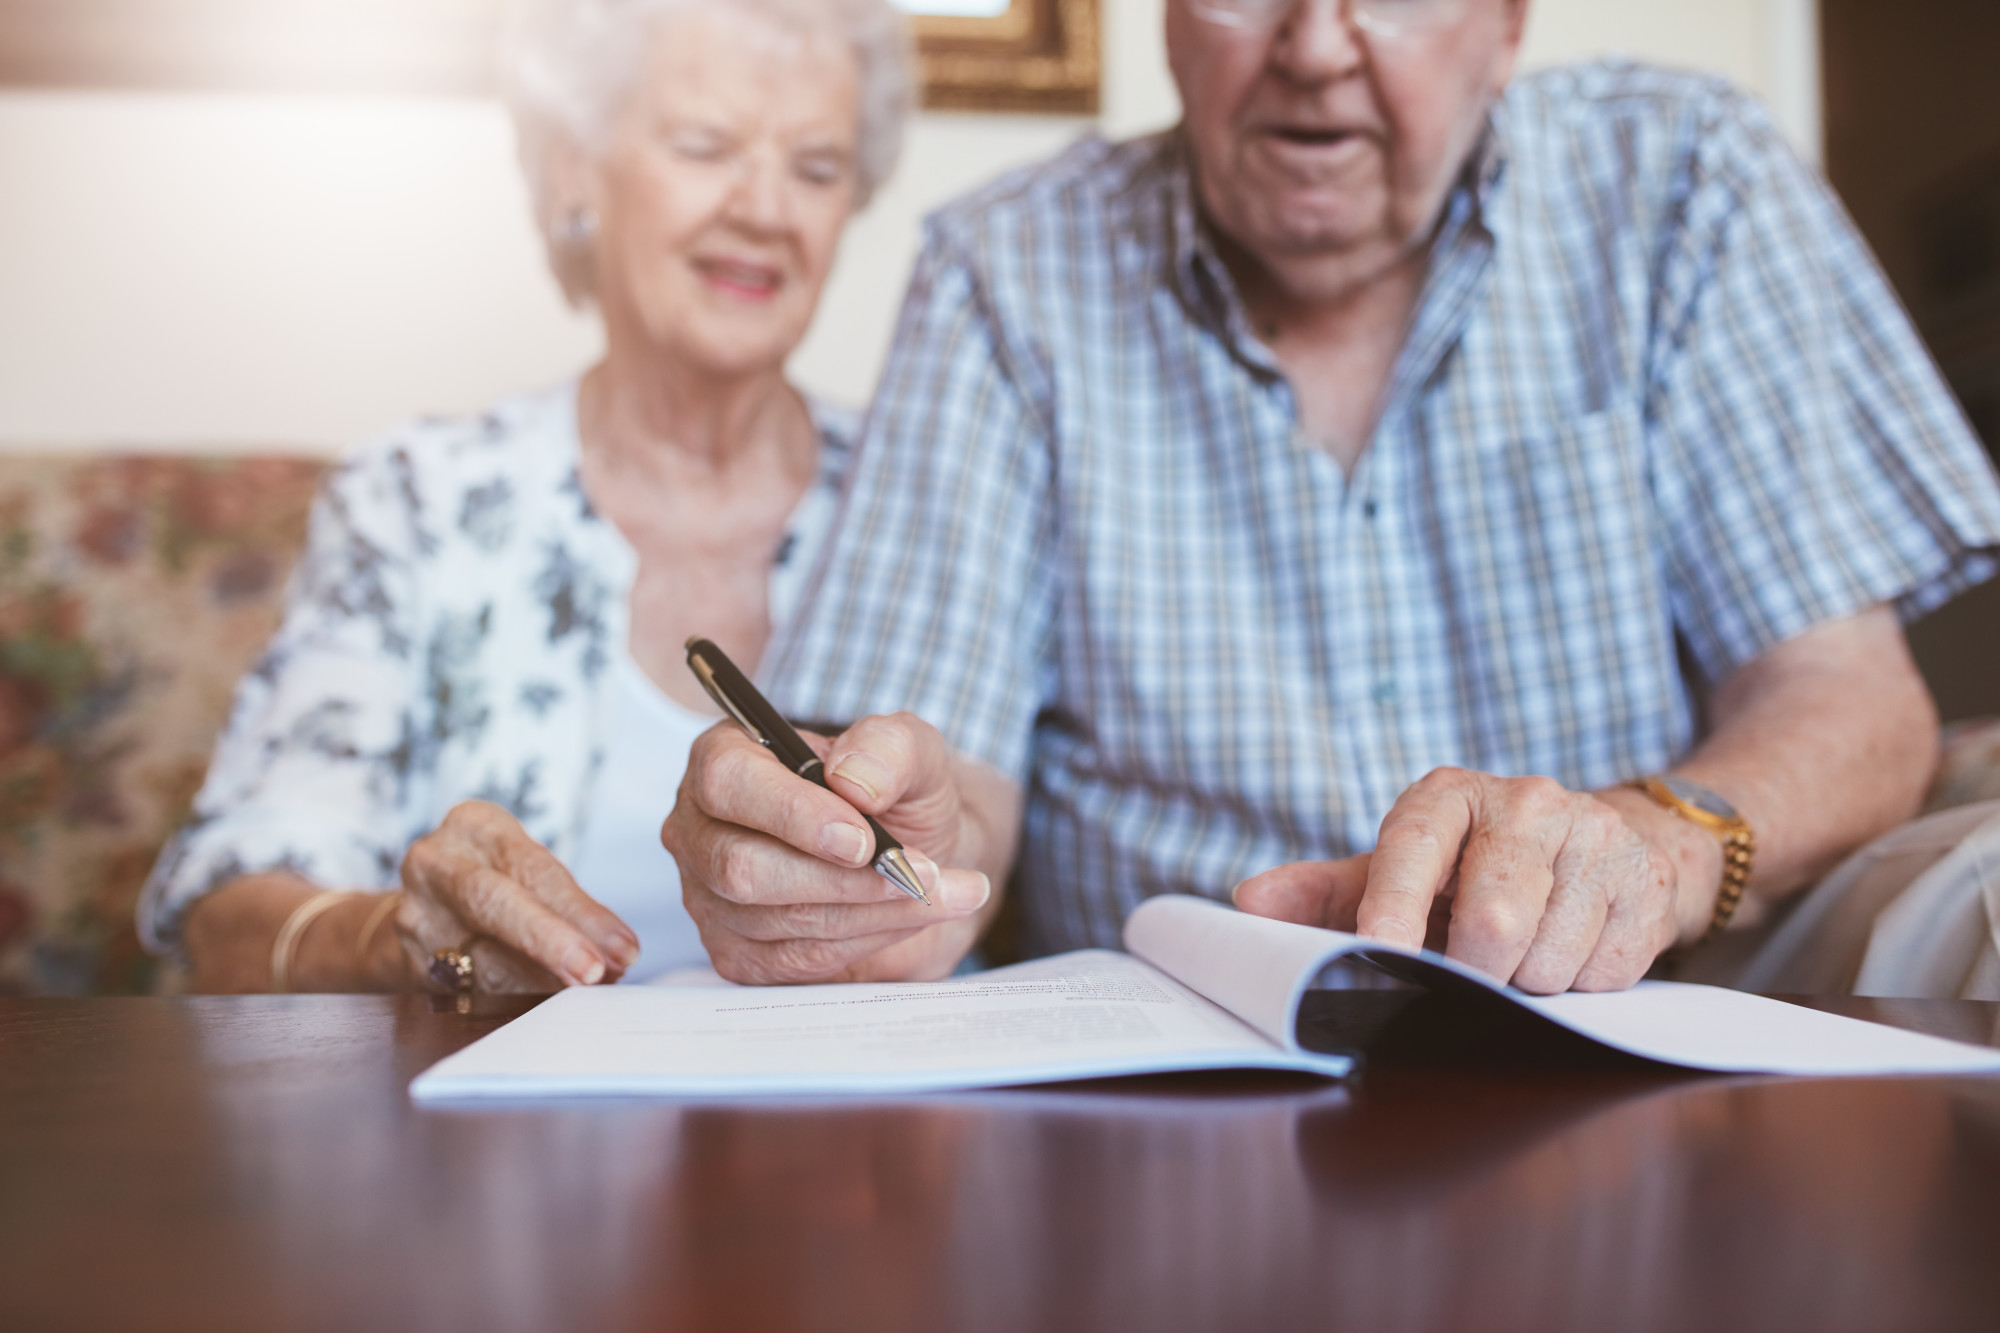 You have options when it comes to taking care of a loved one who can no longer take care of themselves. Is a conservatorship vs guardianship better?